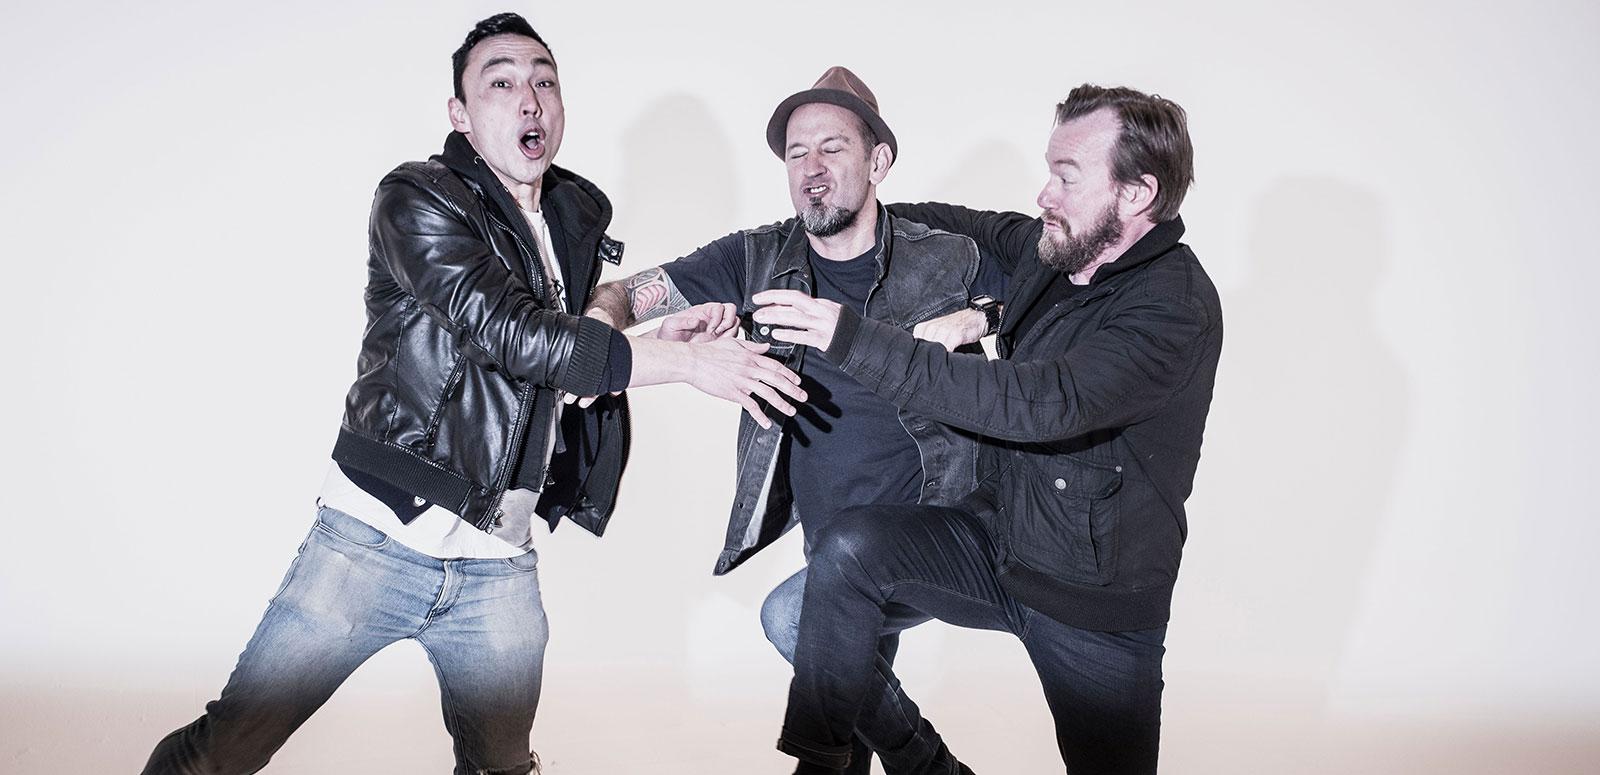 Three band members from Regurgitator comically pushing and shoving each other. 